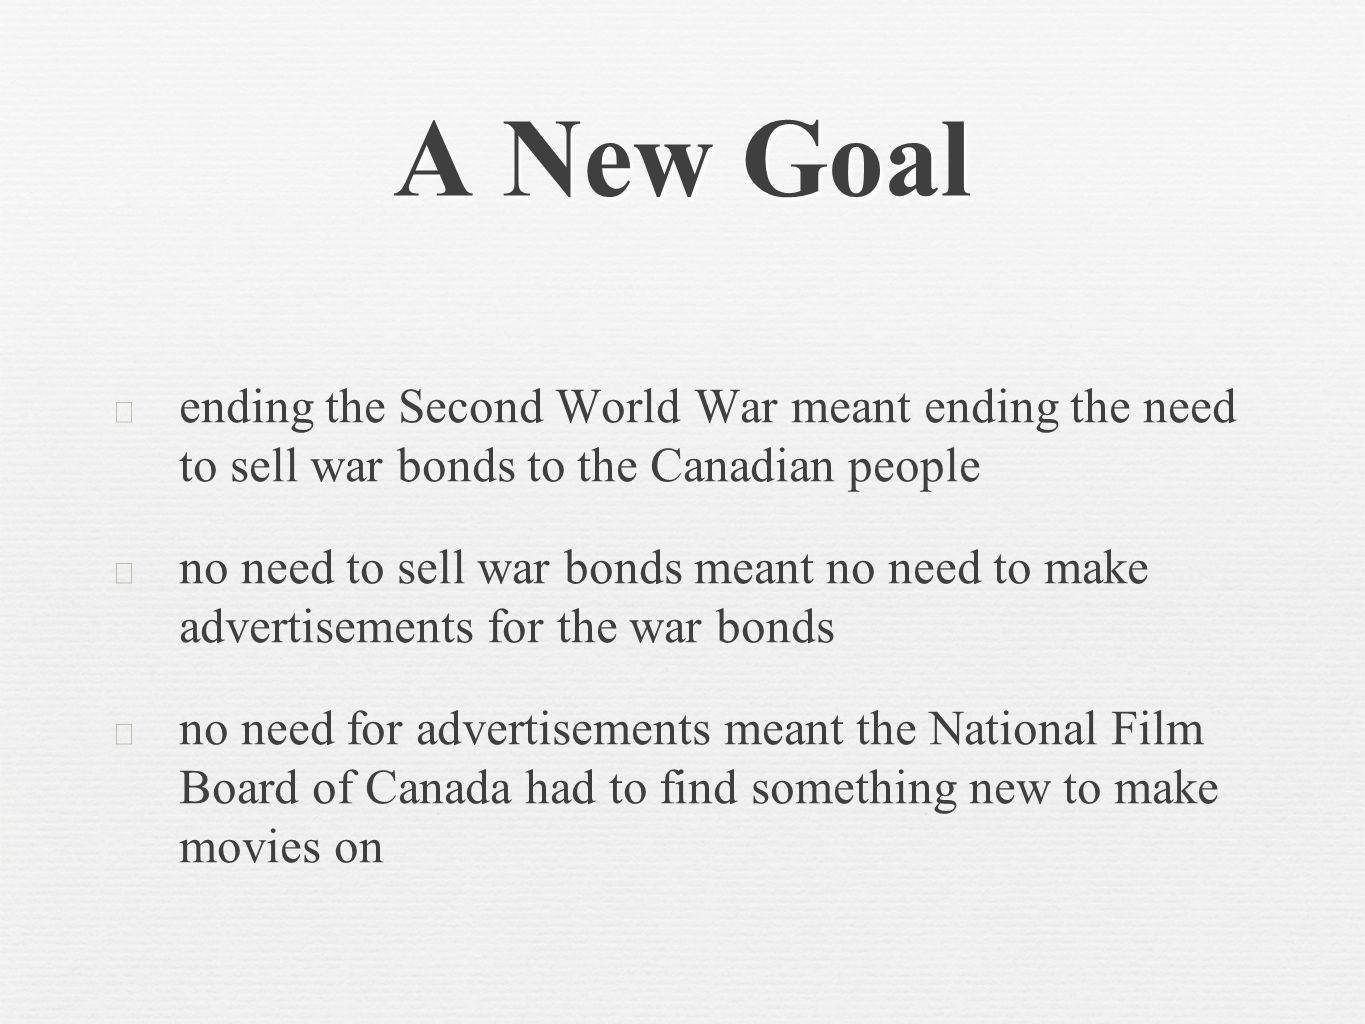 A New Goal ★ ending the Second World War meant ending the need to sell war bonds to the Canadian people ★ no need to sell war bonds meant no need to make advertisements for the war bonds ★ no need for advertisements meant the National Film Board of Canada had to find something new to make movies on